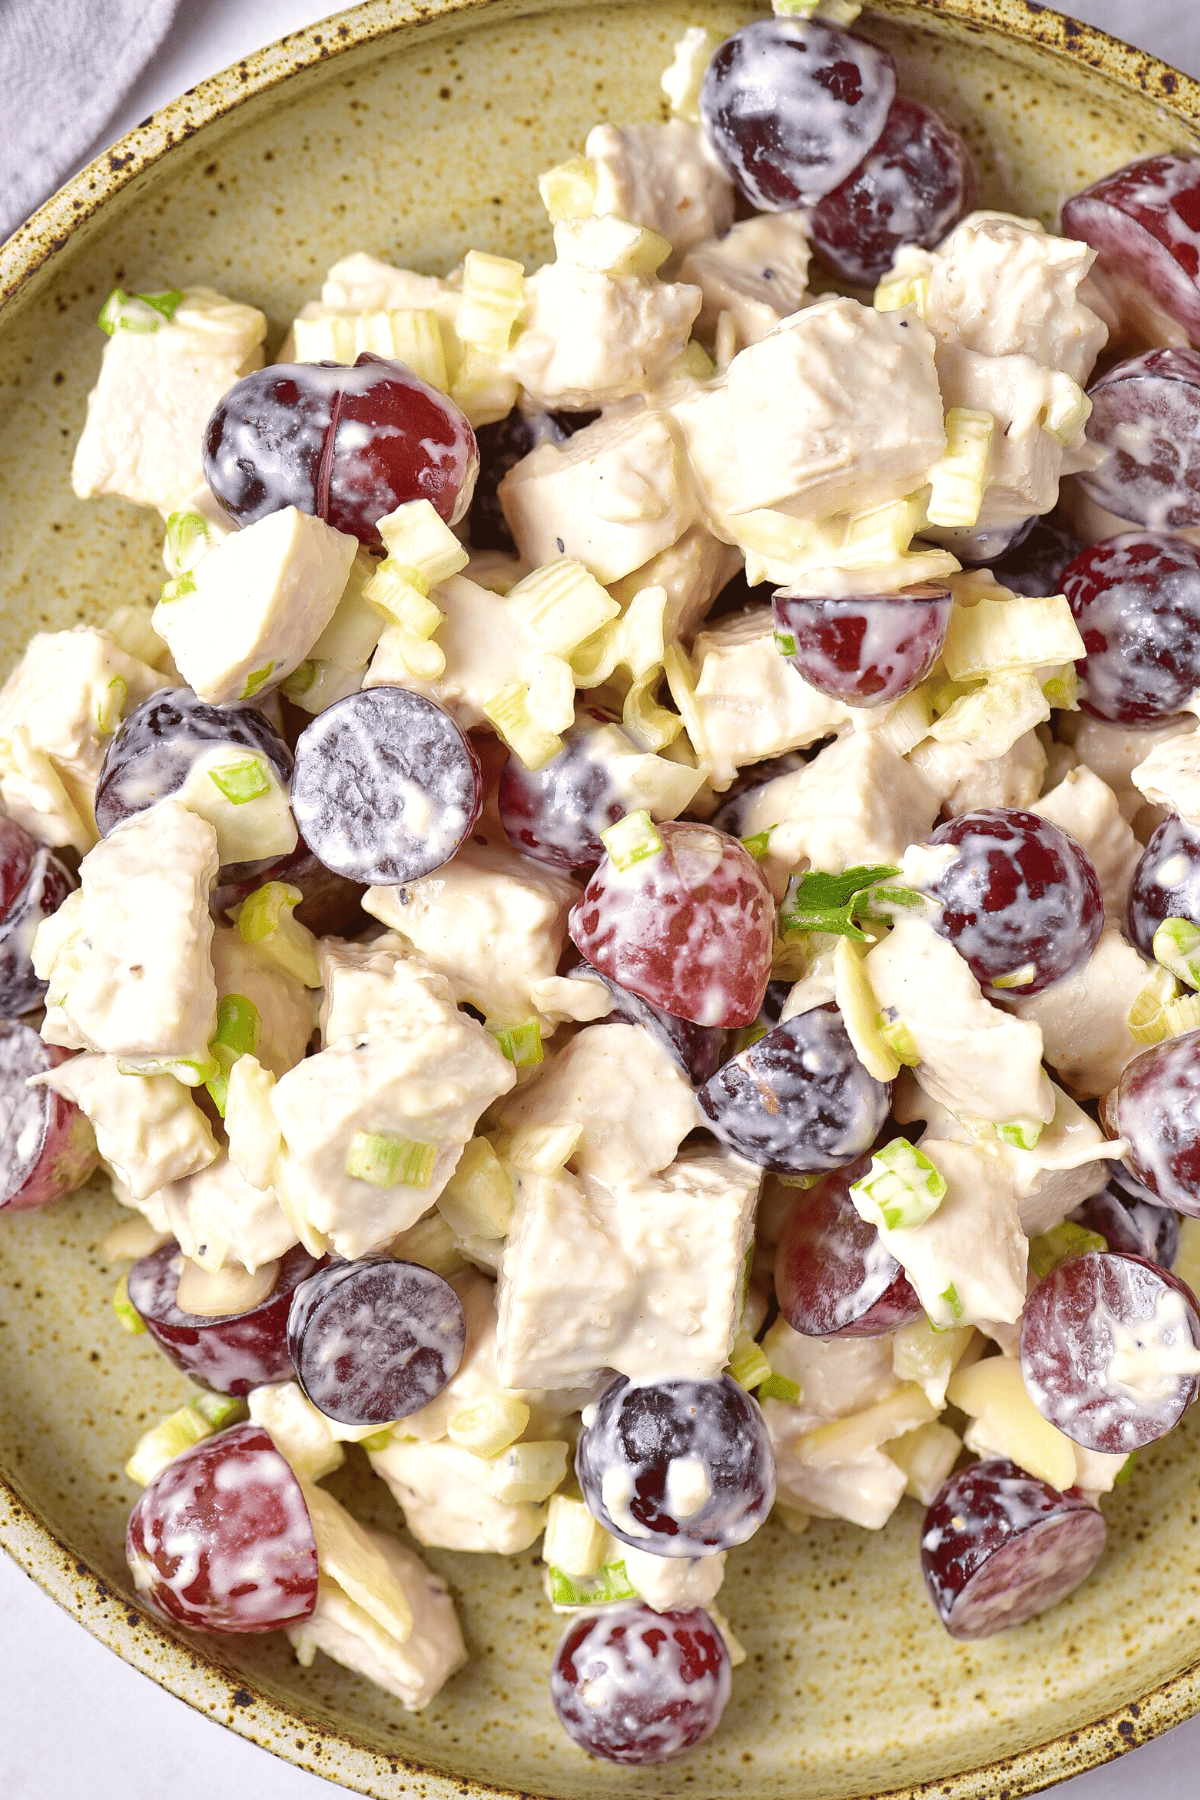 Top down view of gluten-free dairy-free chicken salad on a green plate.